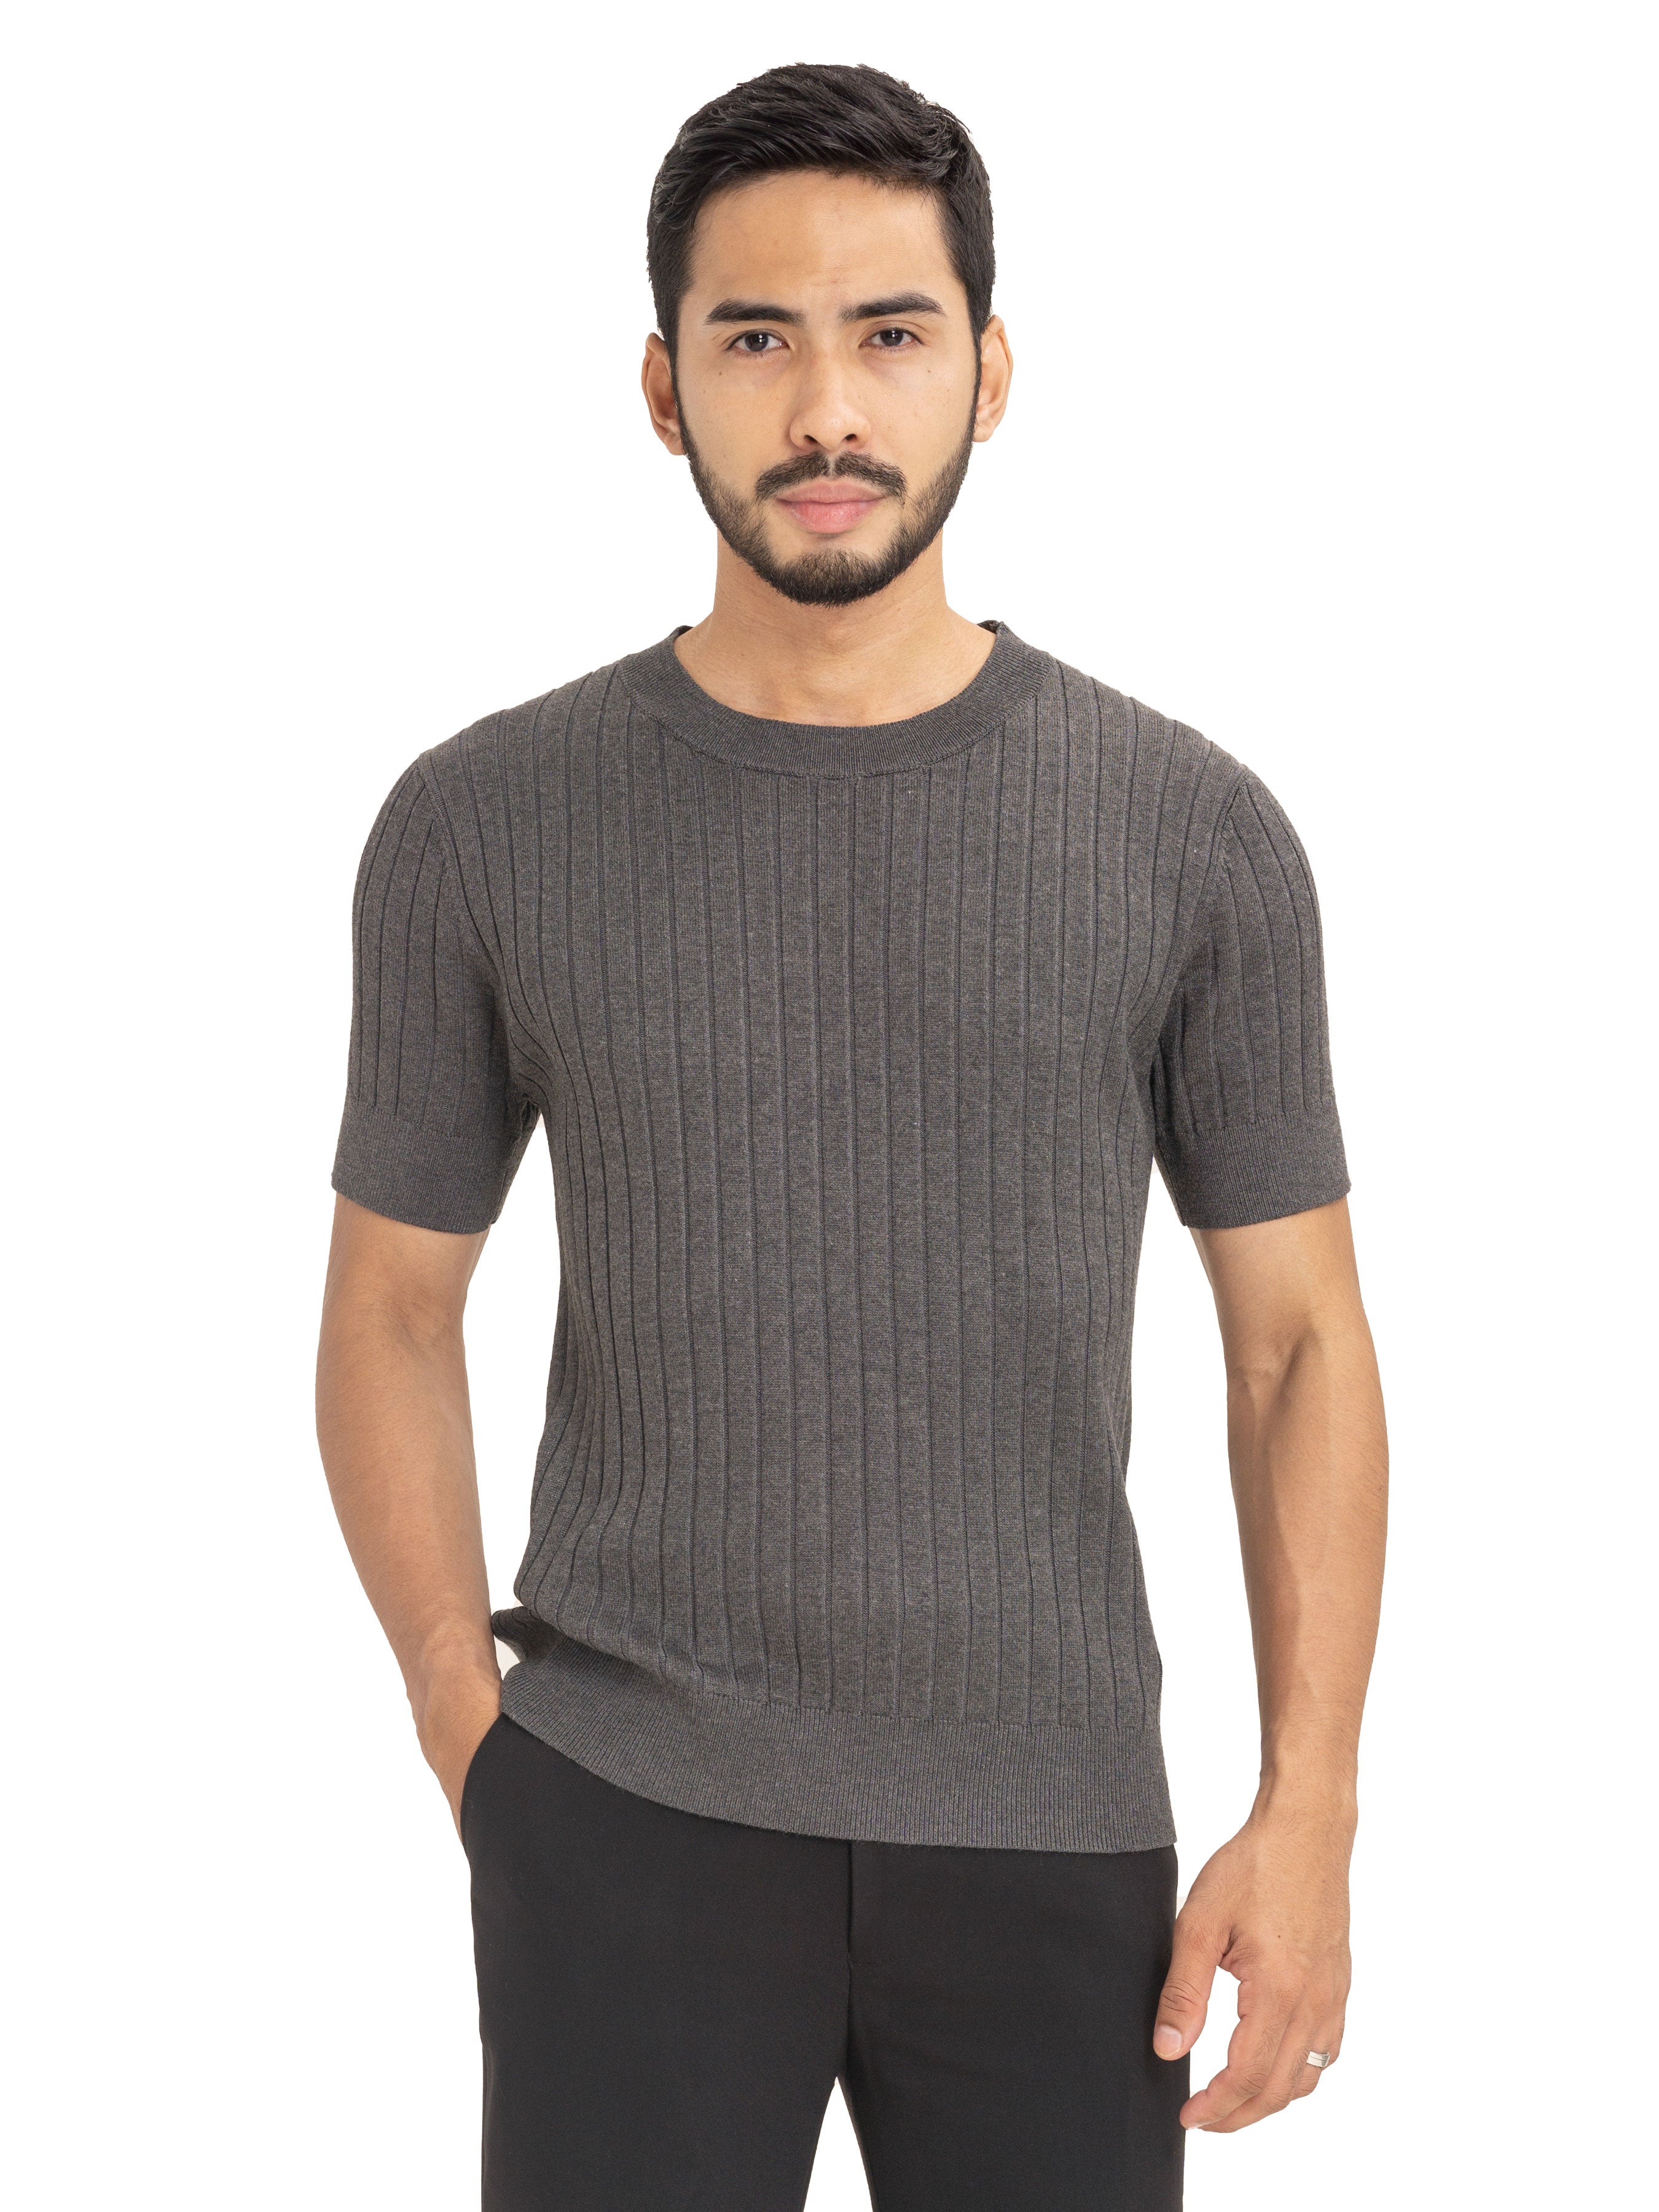 Ribbed Knit Tee - Dark Grey - Zeve Shoes